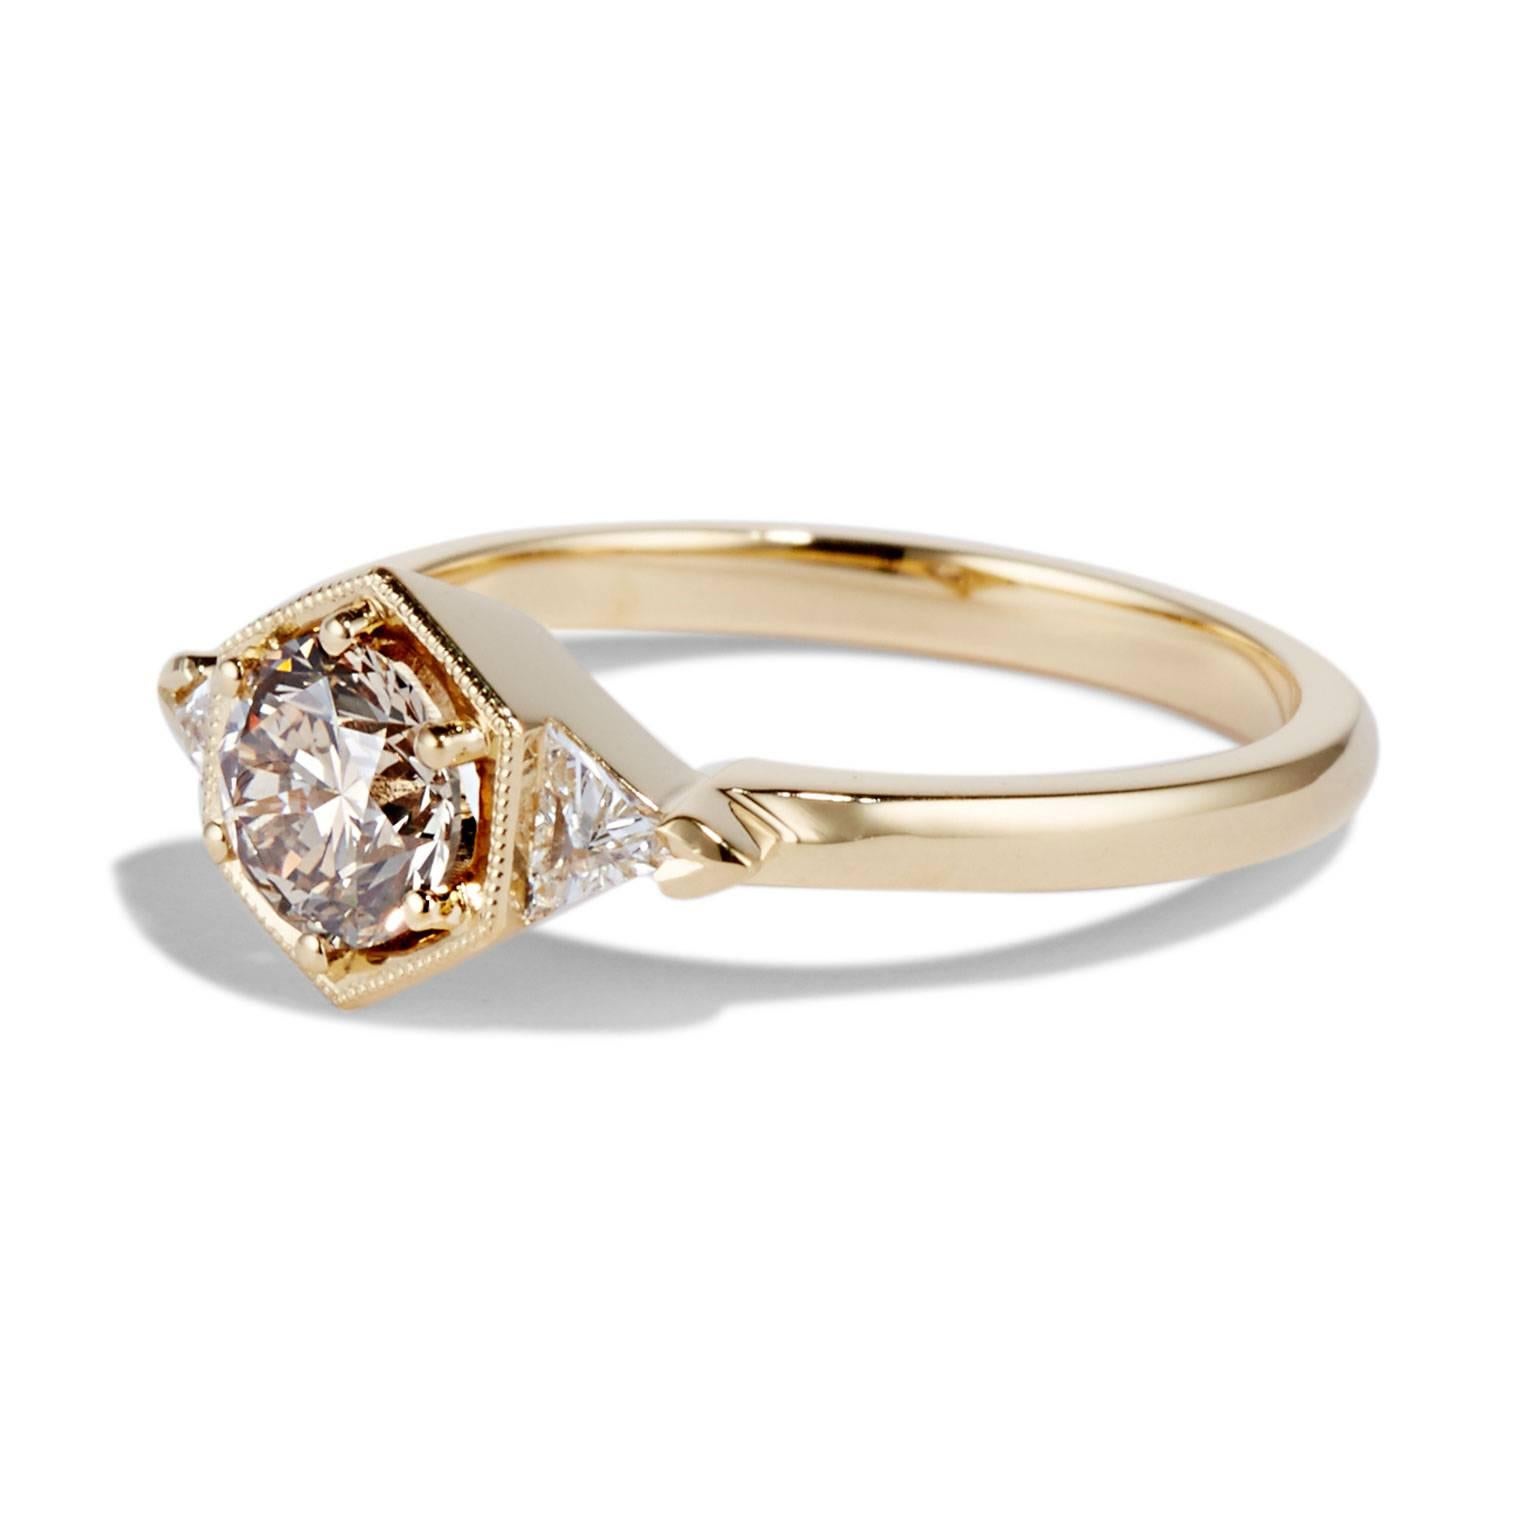 The Matilda ring fused modern stones with an antique aesthetic in an ultra-feminine style. A 0.80 carat diamond sits inside and 18-karat gold hexagonal setting, accompanied by two triangle shaped diamonds either side.

Image shows the MATILDA ring